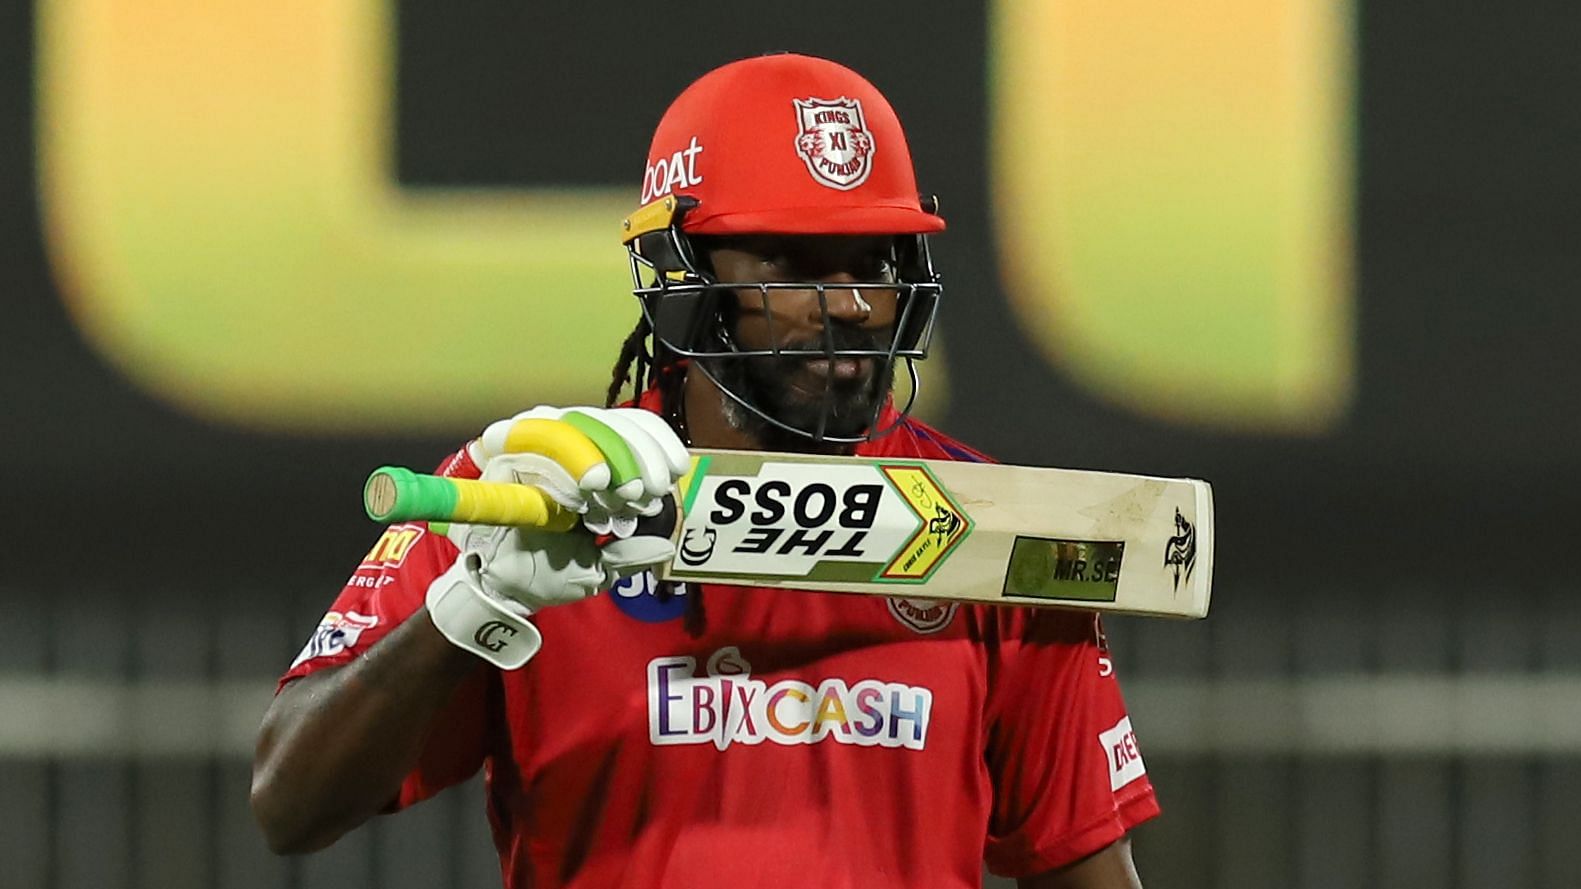 Chris Gayle scored a half century while making his IPL 2020 debut vs RCB on Thursday.